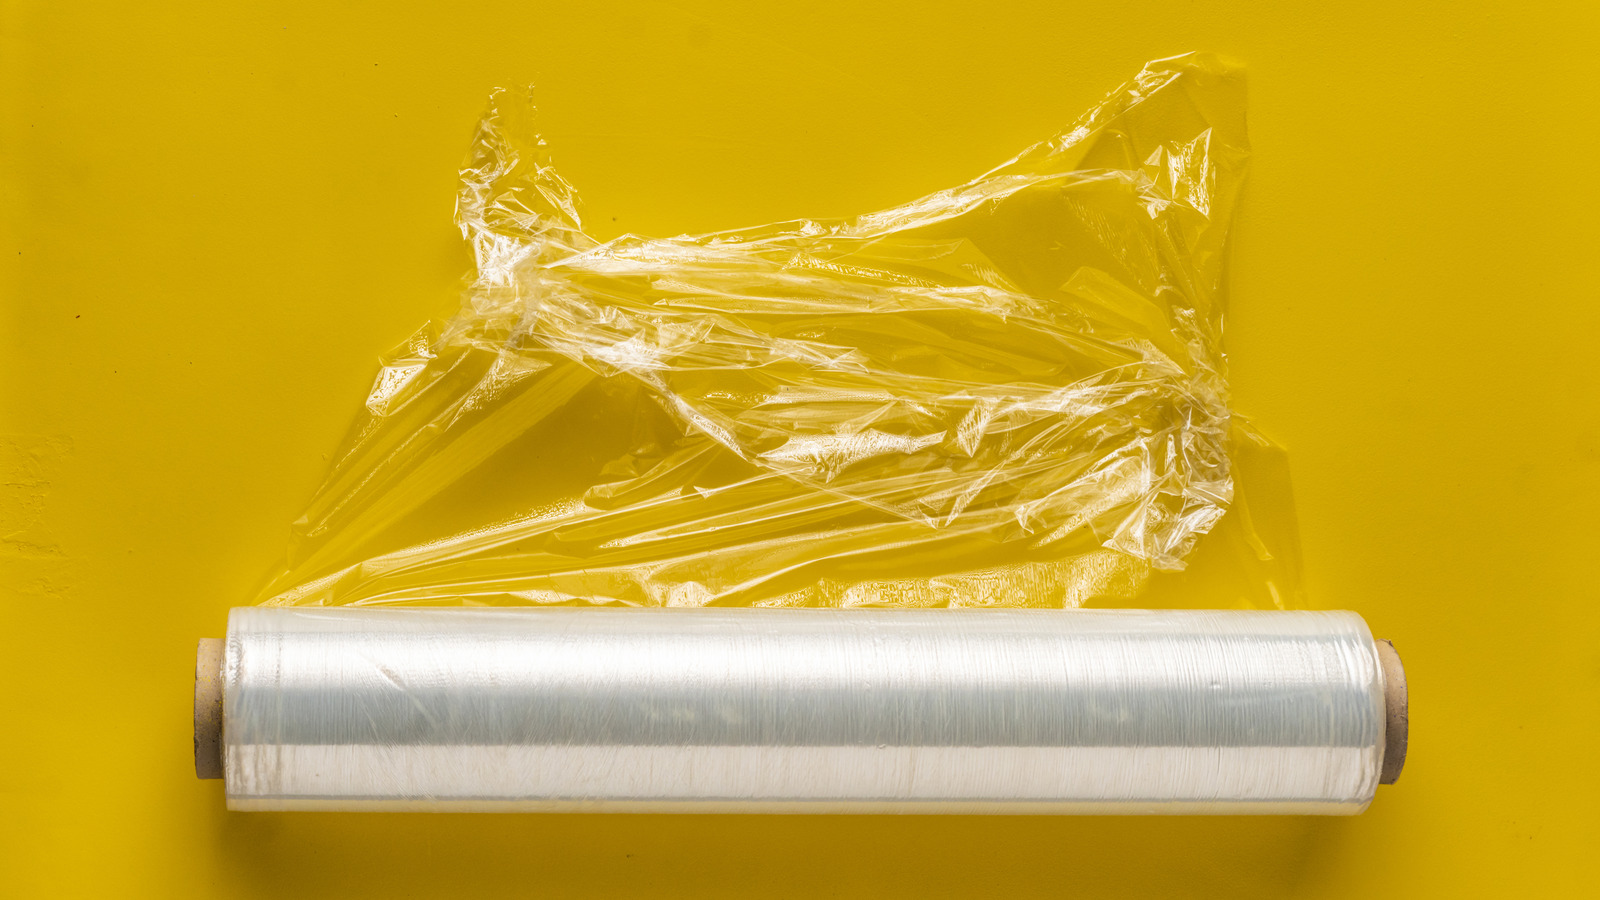 https://www.thedailymeal.com/img/gallery/10-foods-you-shouldnt-be-wrapping-in-plastic-wrap/l-intro-1677597573.jpg